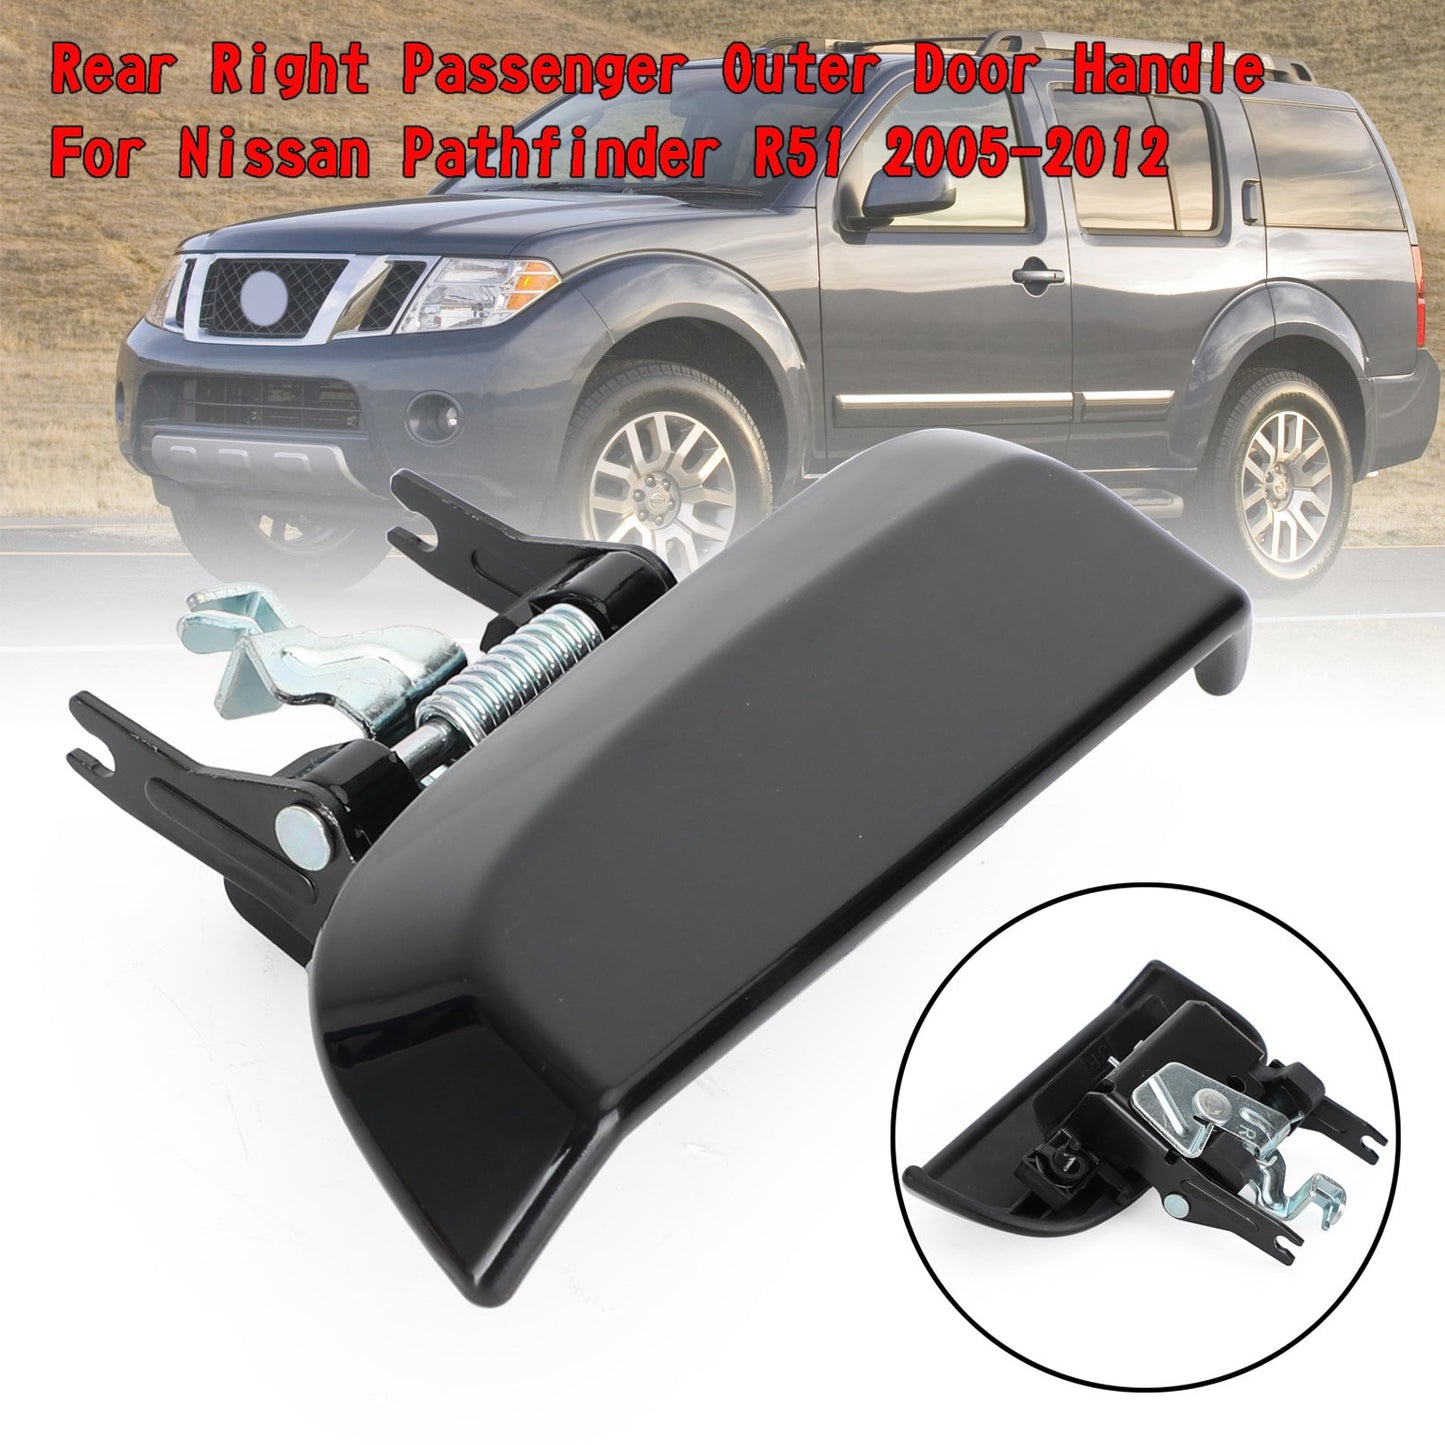 Rear Left+Right Passenger Outer Door Handle For Nissan Pathfinder R51 2005-2012